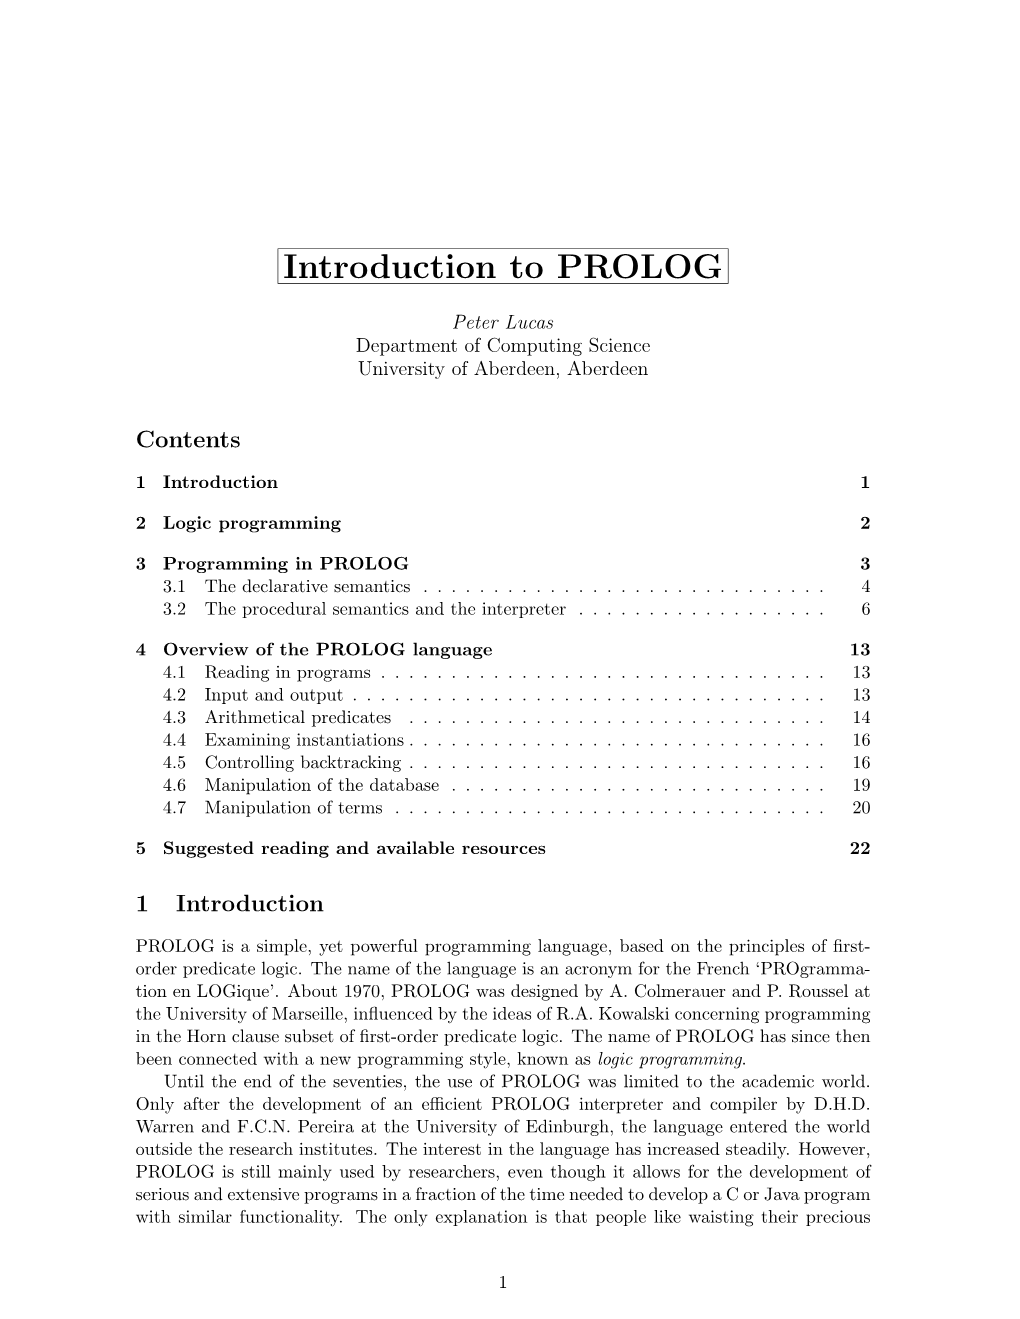 Introduction to PROLOG